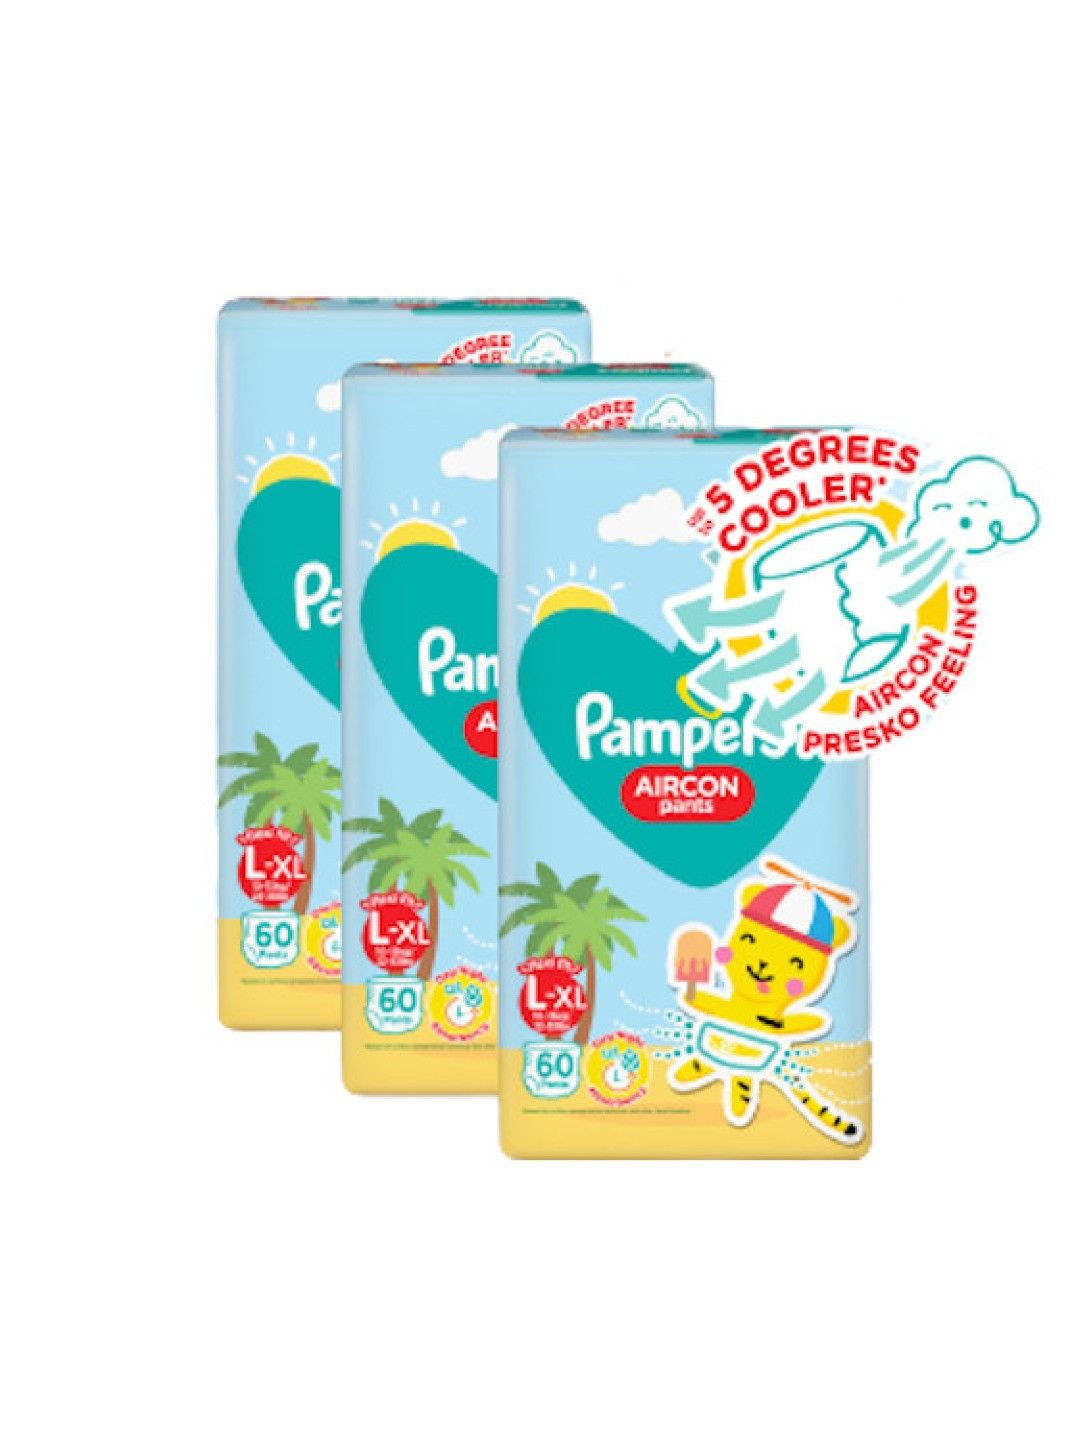 Pampers Aircon Pants Diapers Large 60s x 3 packs (180 pcs)